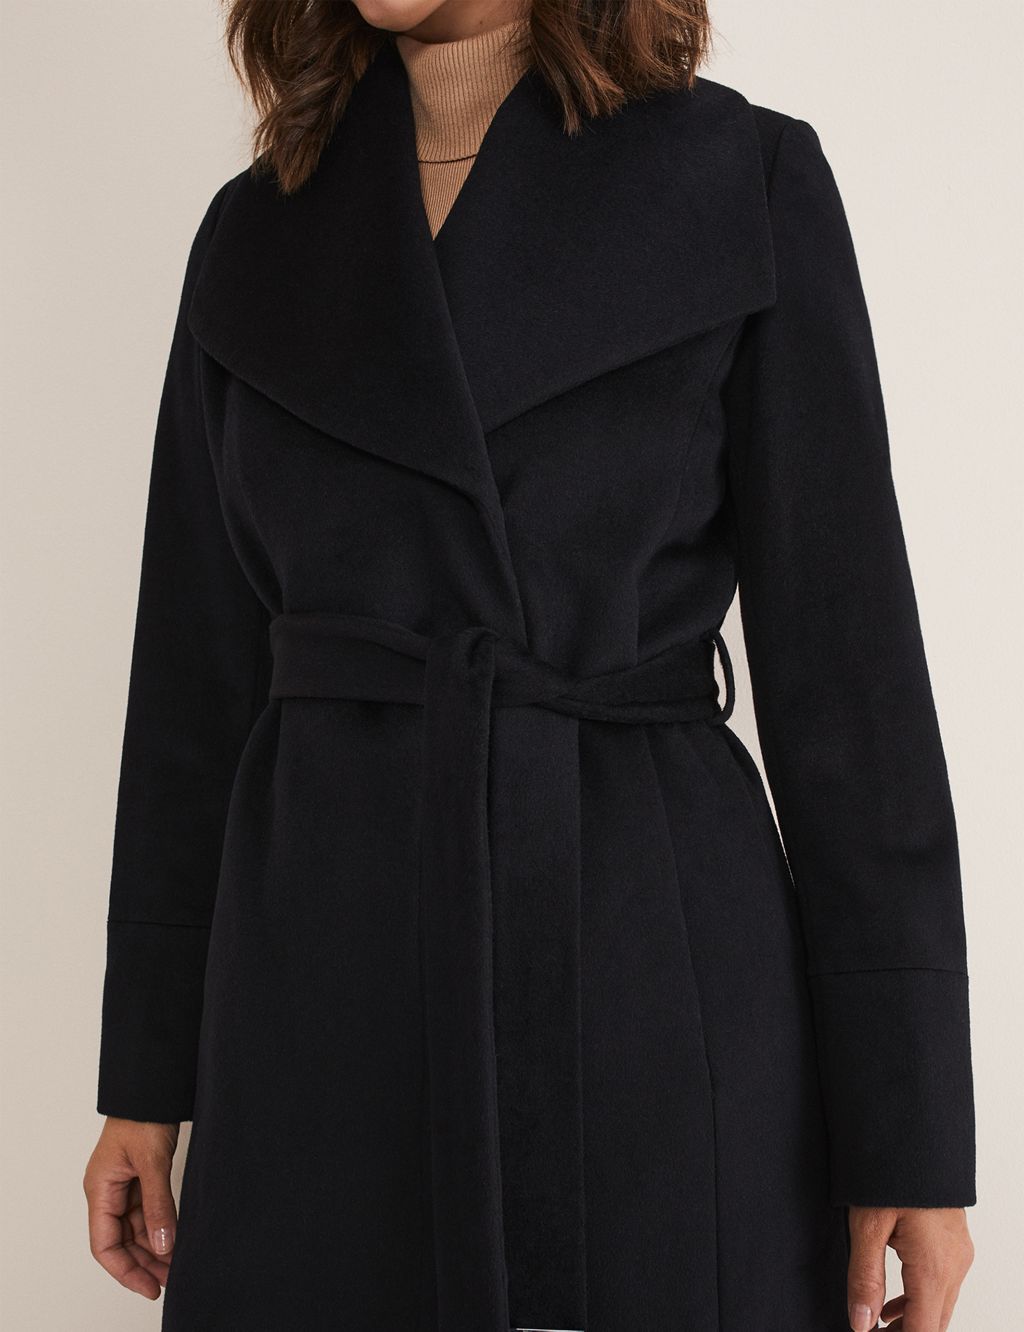 Wool Rich Collared Wrap Coat image 6